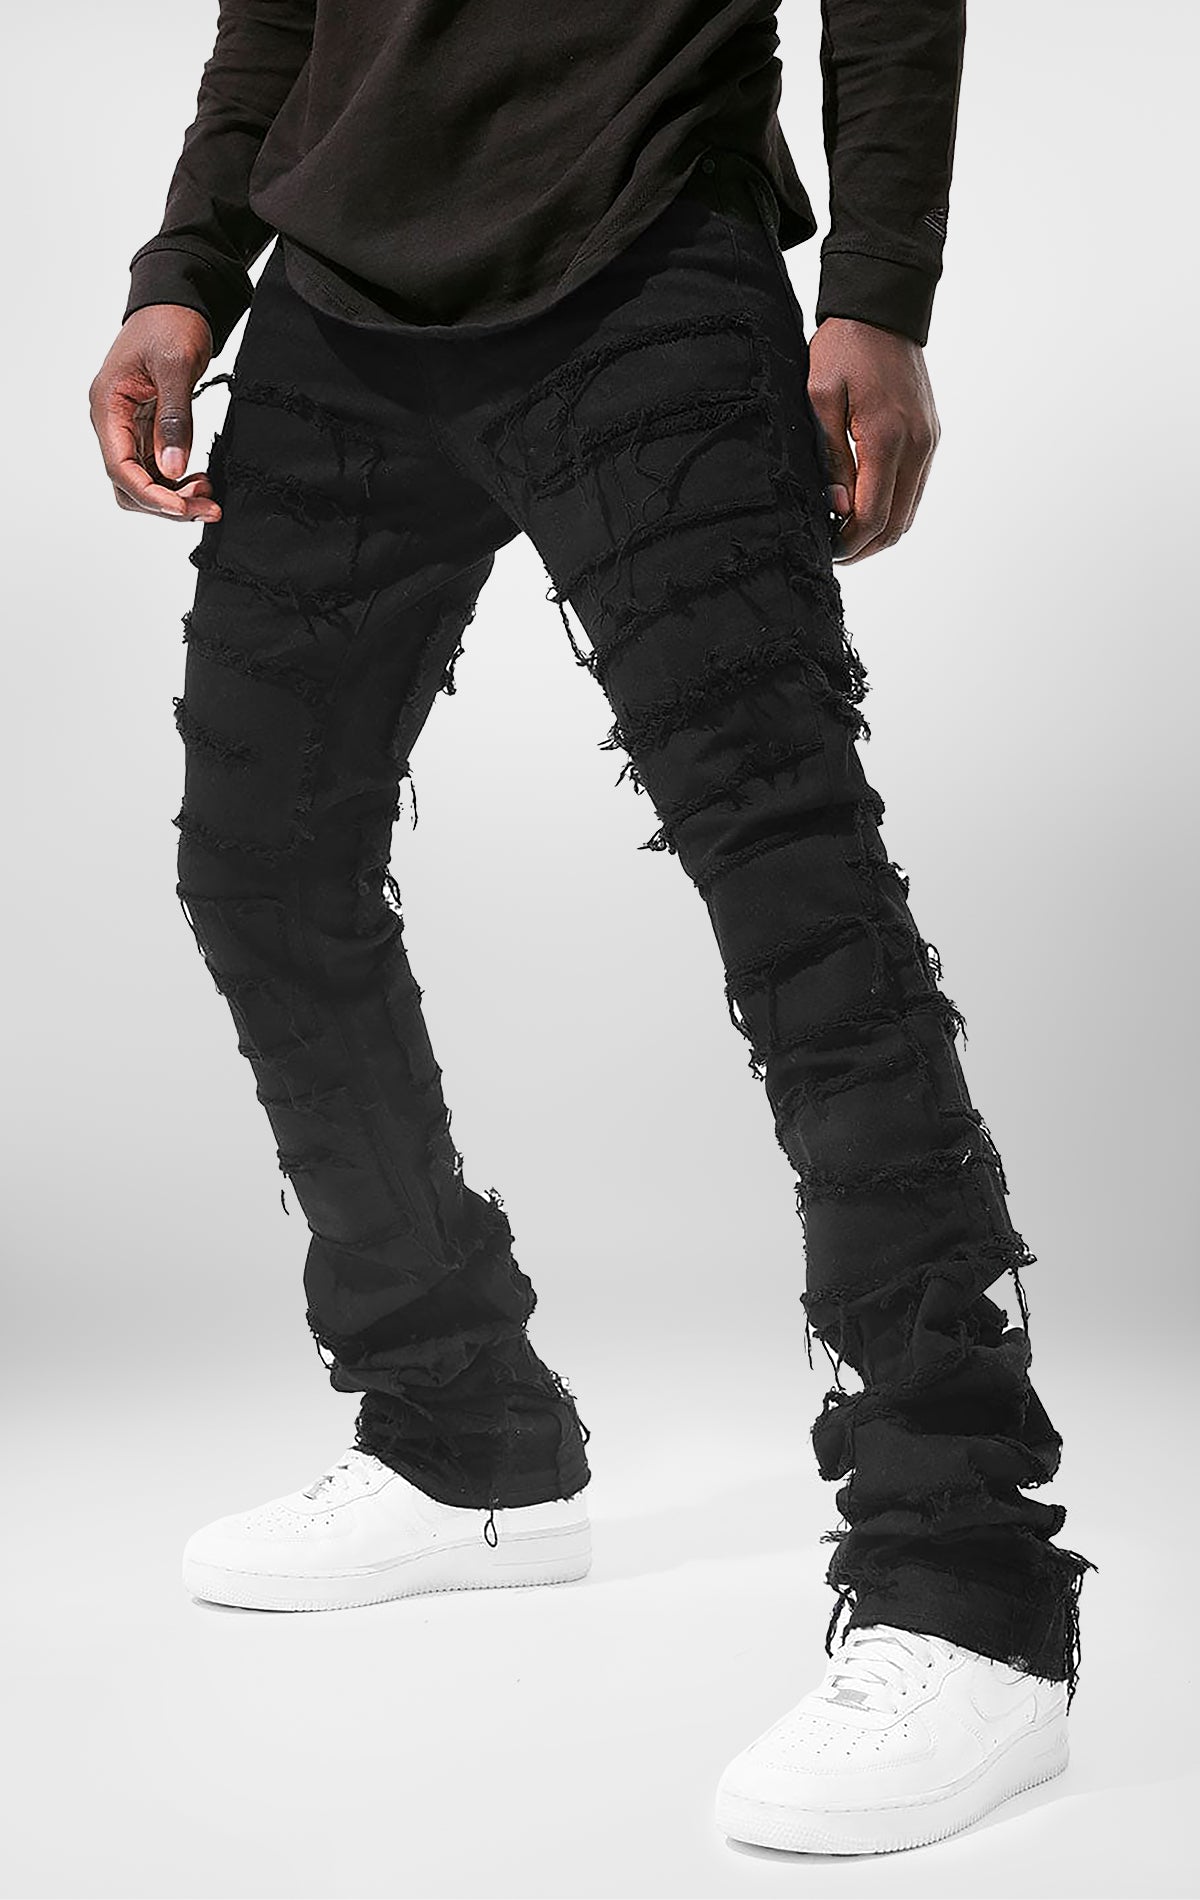 Lager bold, risk-taking flare pants feature a regular rise and extended length for maximum stacks. With a unique heavy wash and rip and repair design, complete with patches and abrasions, these skinny fit jeans are ready for adventure. Made from 98% cotton and 2% Lycra